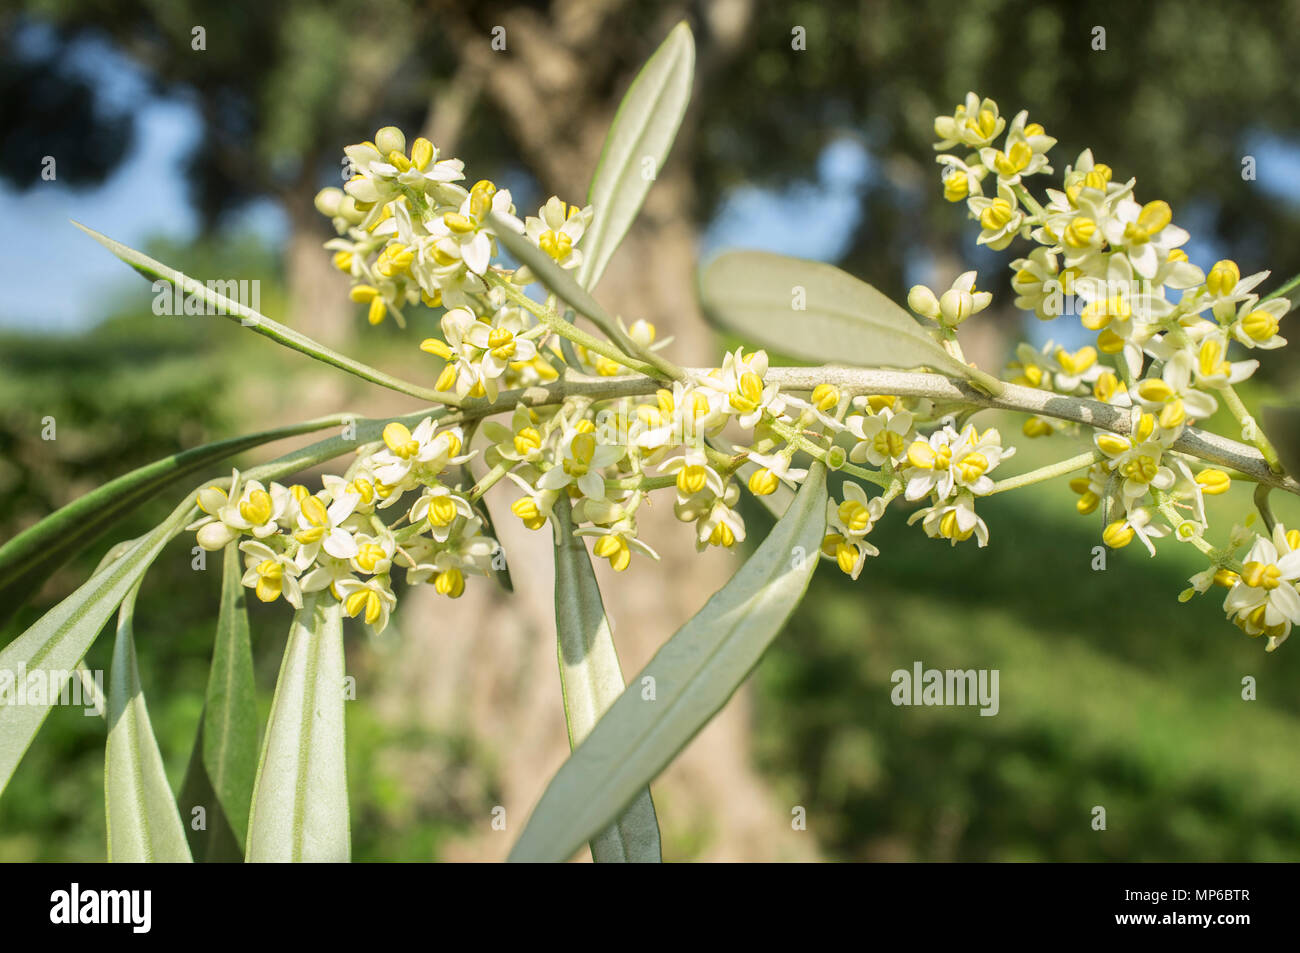 Olive tree in bloom. Branch of olive tree full of flowers Stock Photo